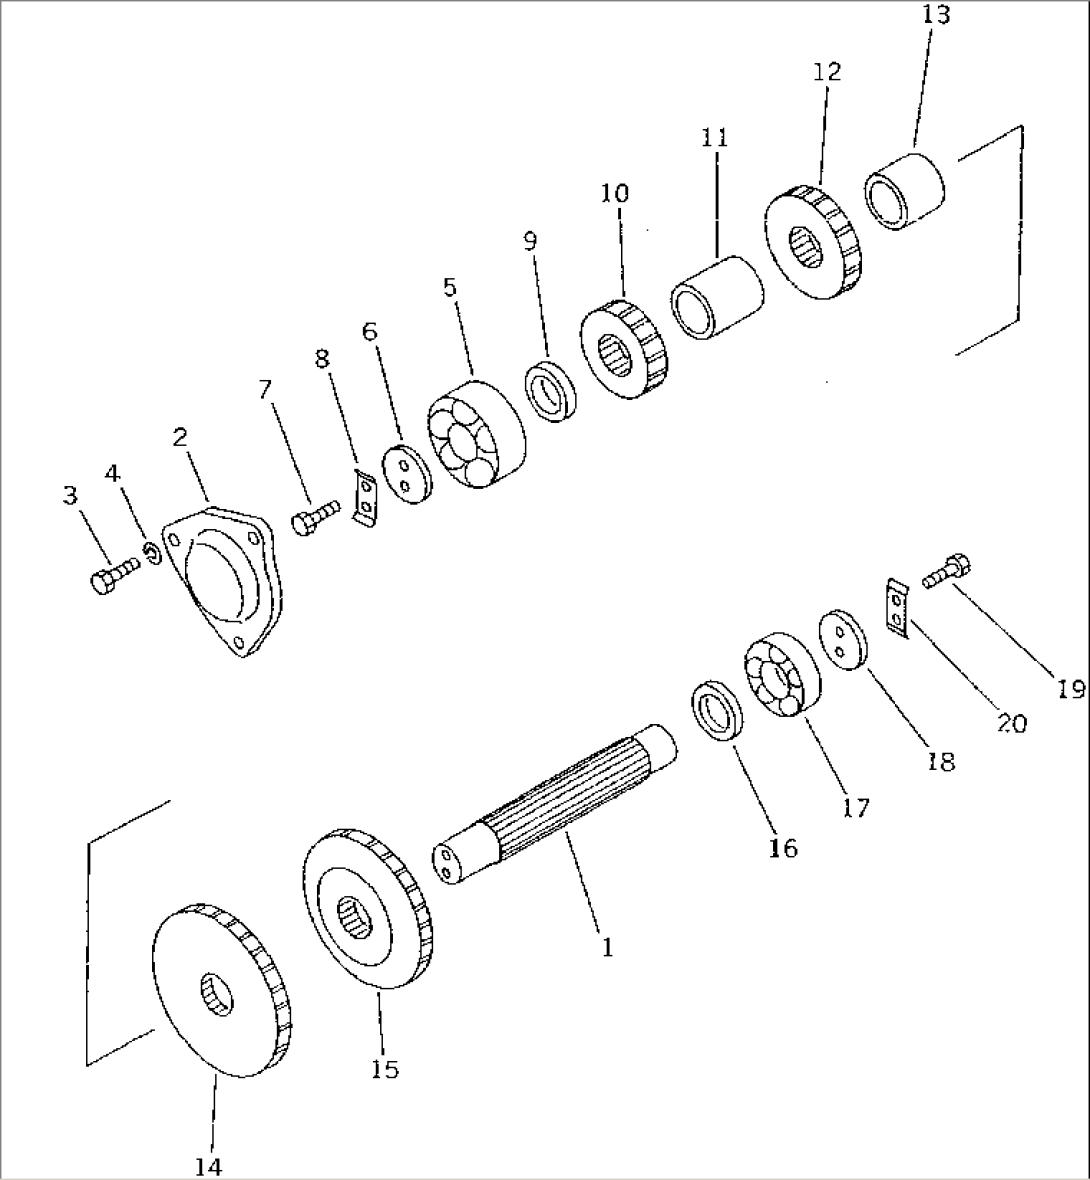 TRANSMISSION (INTERMEDIATE SHAFT AND GEAR) (3/5) (WIHT BACK-UP SWITCH)